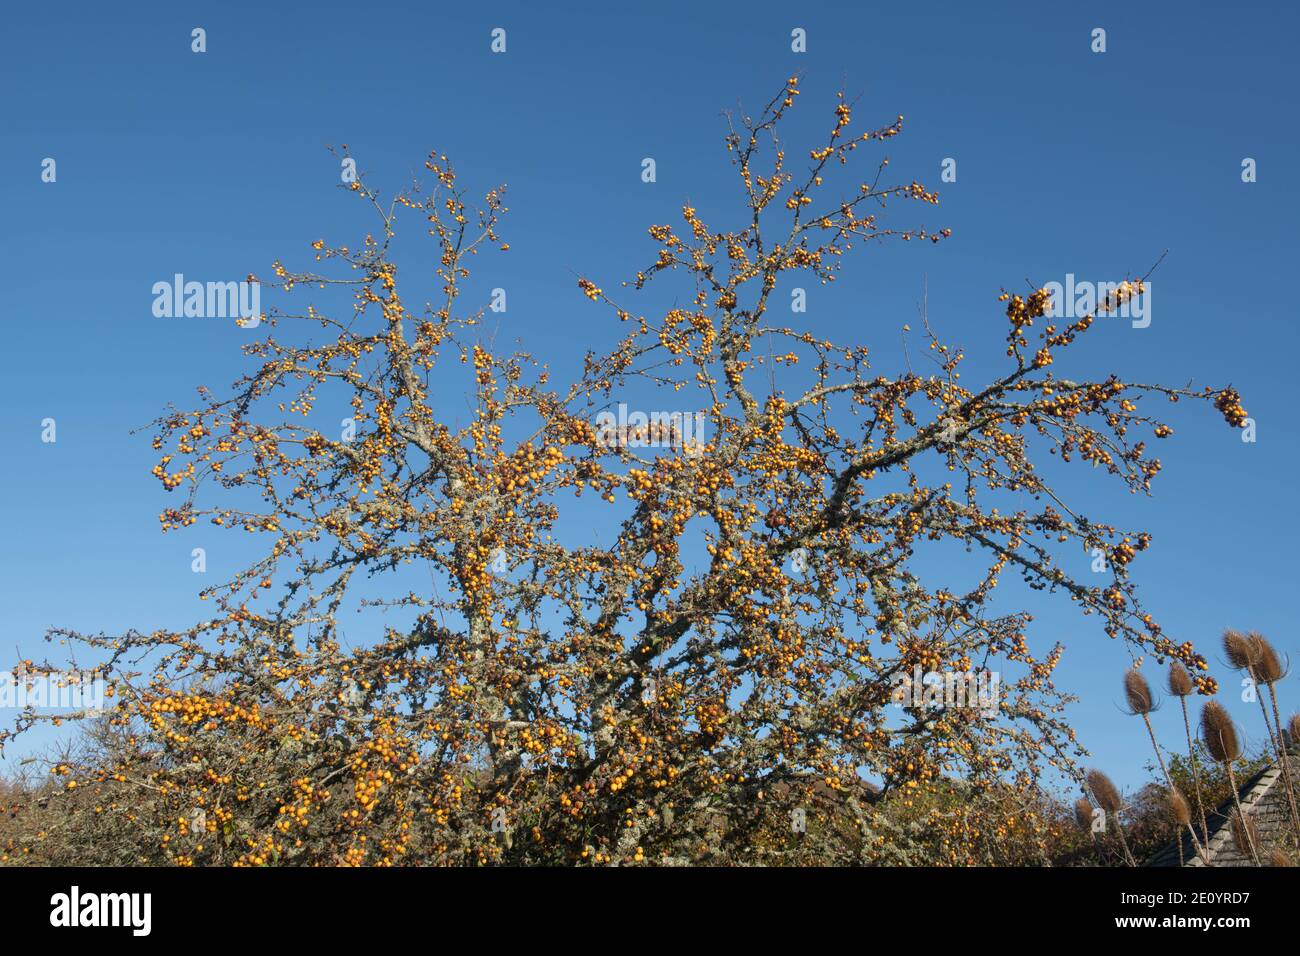 Bright Yellow Autumn Fruit on a Crab Apple Tree (Malus x zumi 'Golden Hornet') with a Bright Blue Sky Background Growing in a Garden in Rural Devon, E Stock Photo